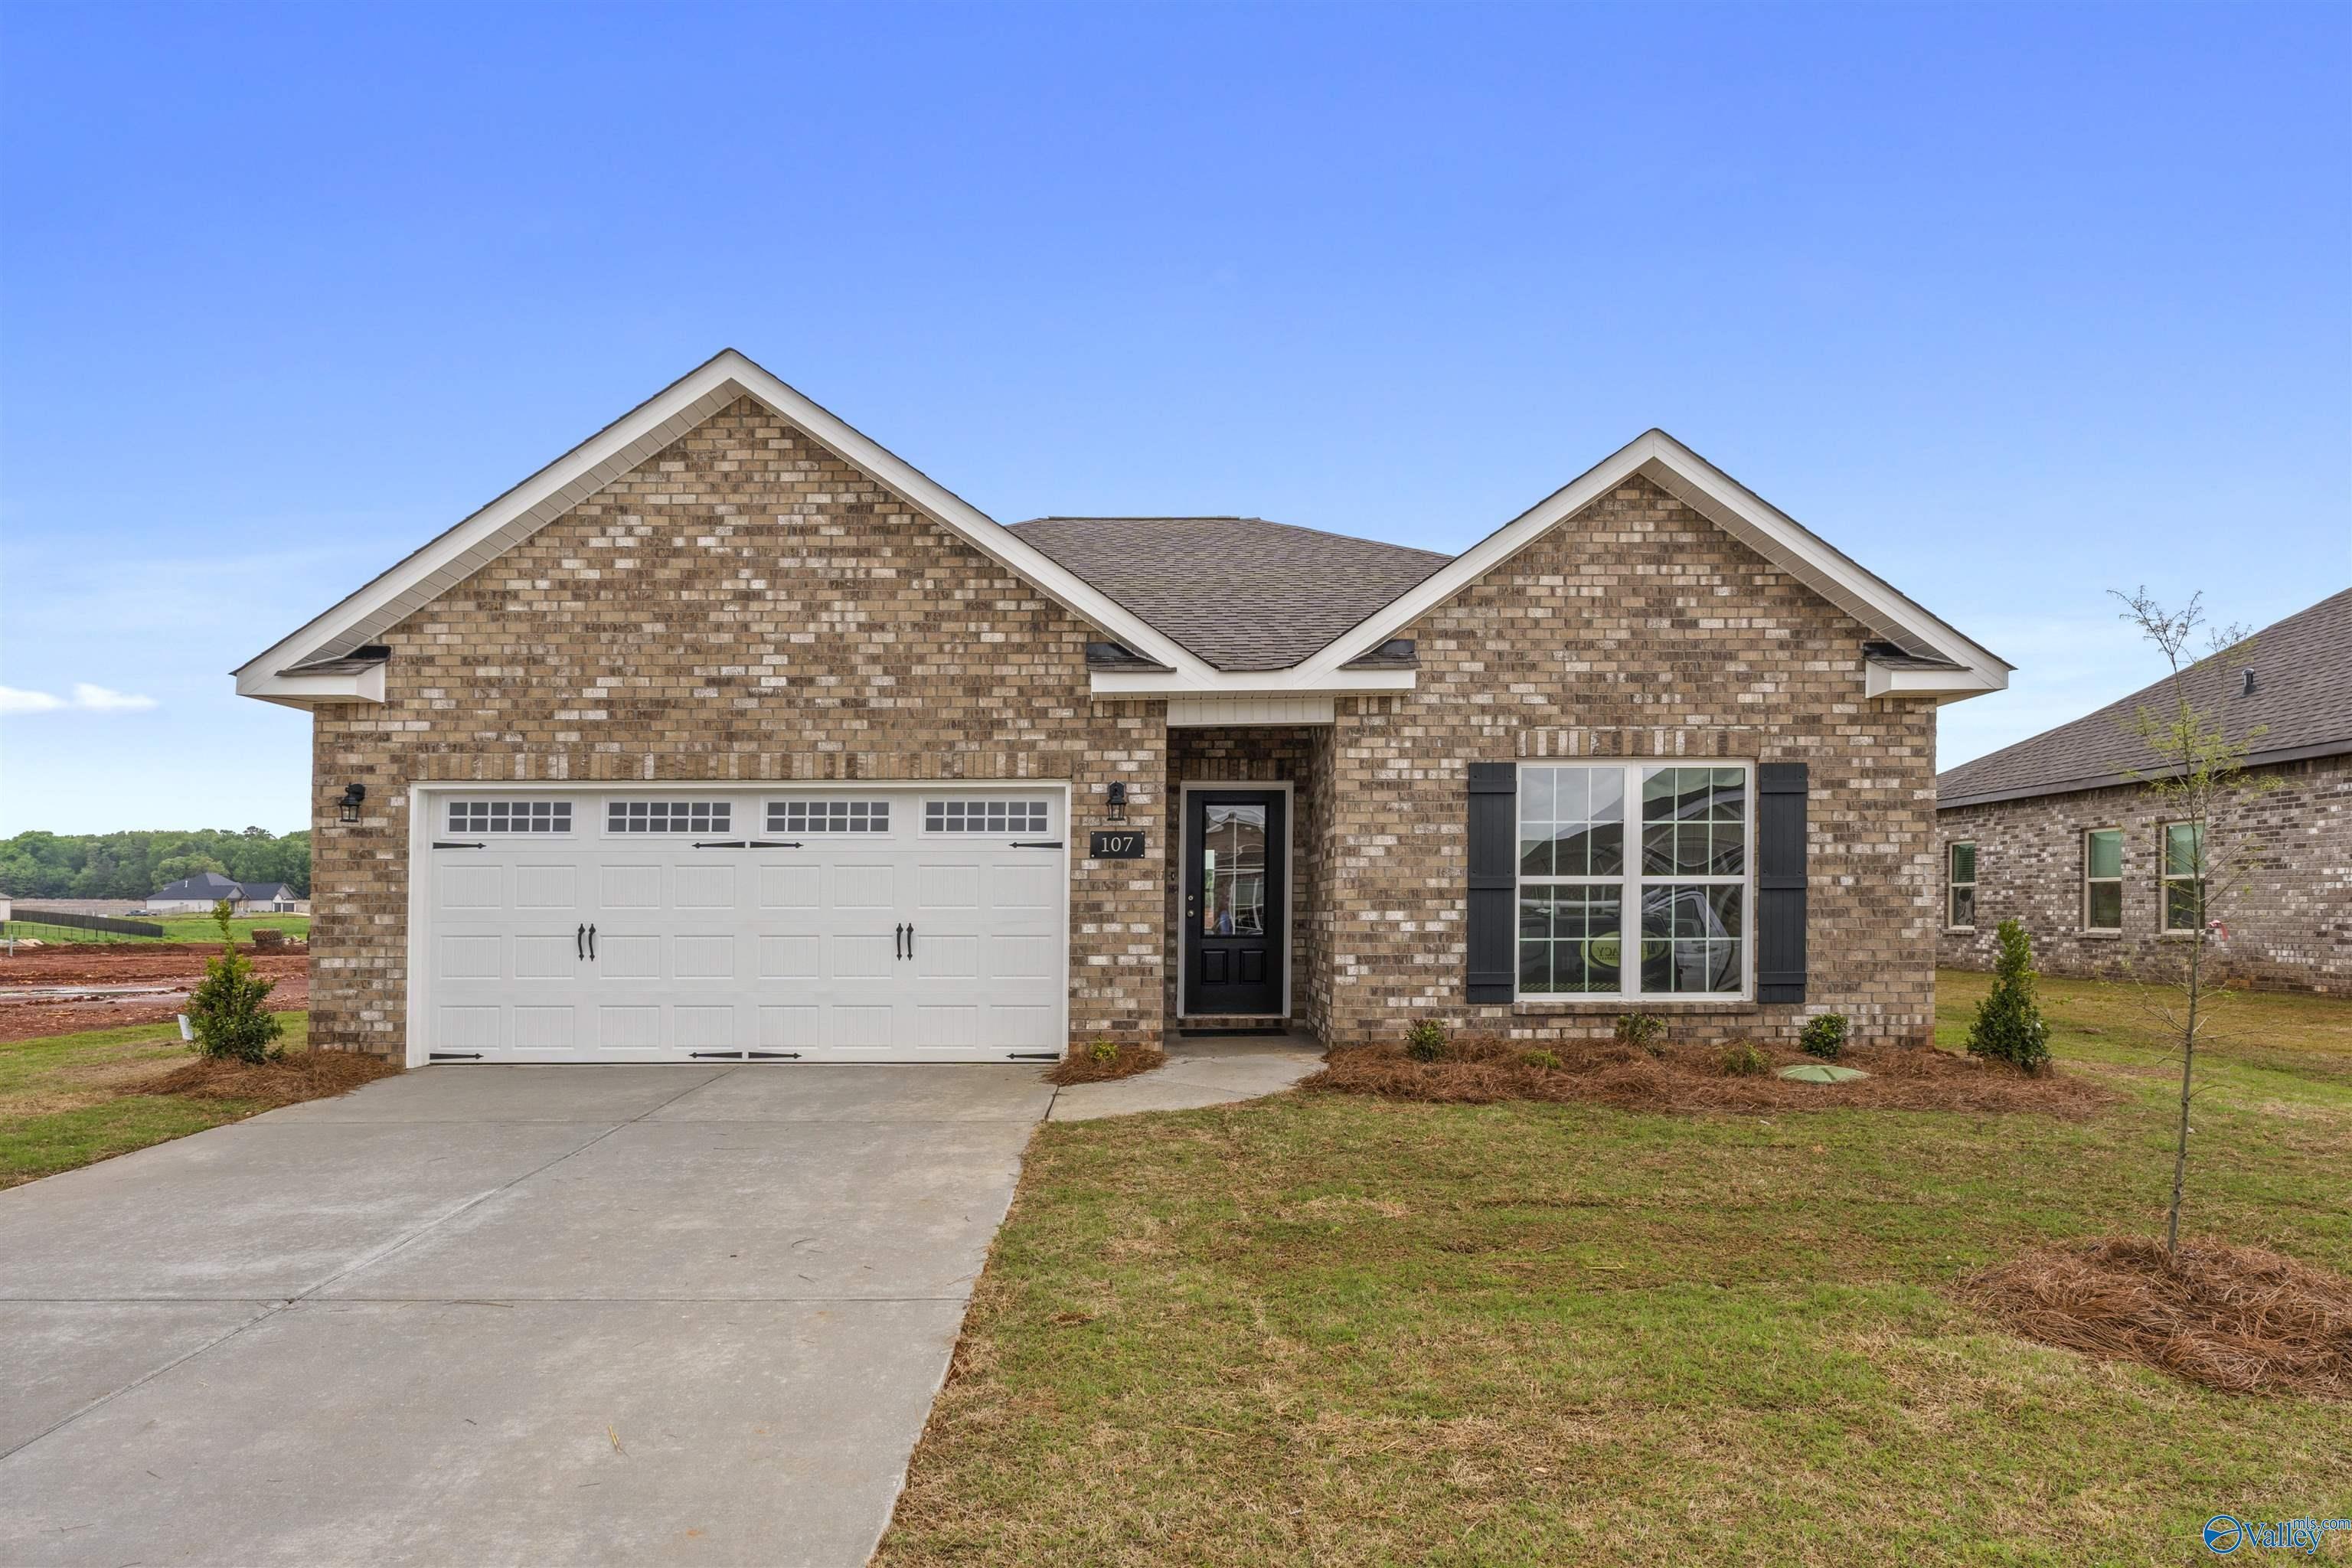 Property Image for 107 Saylor Rose Drive